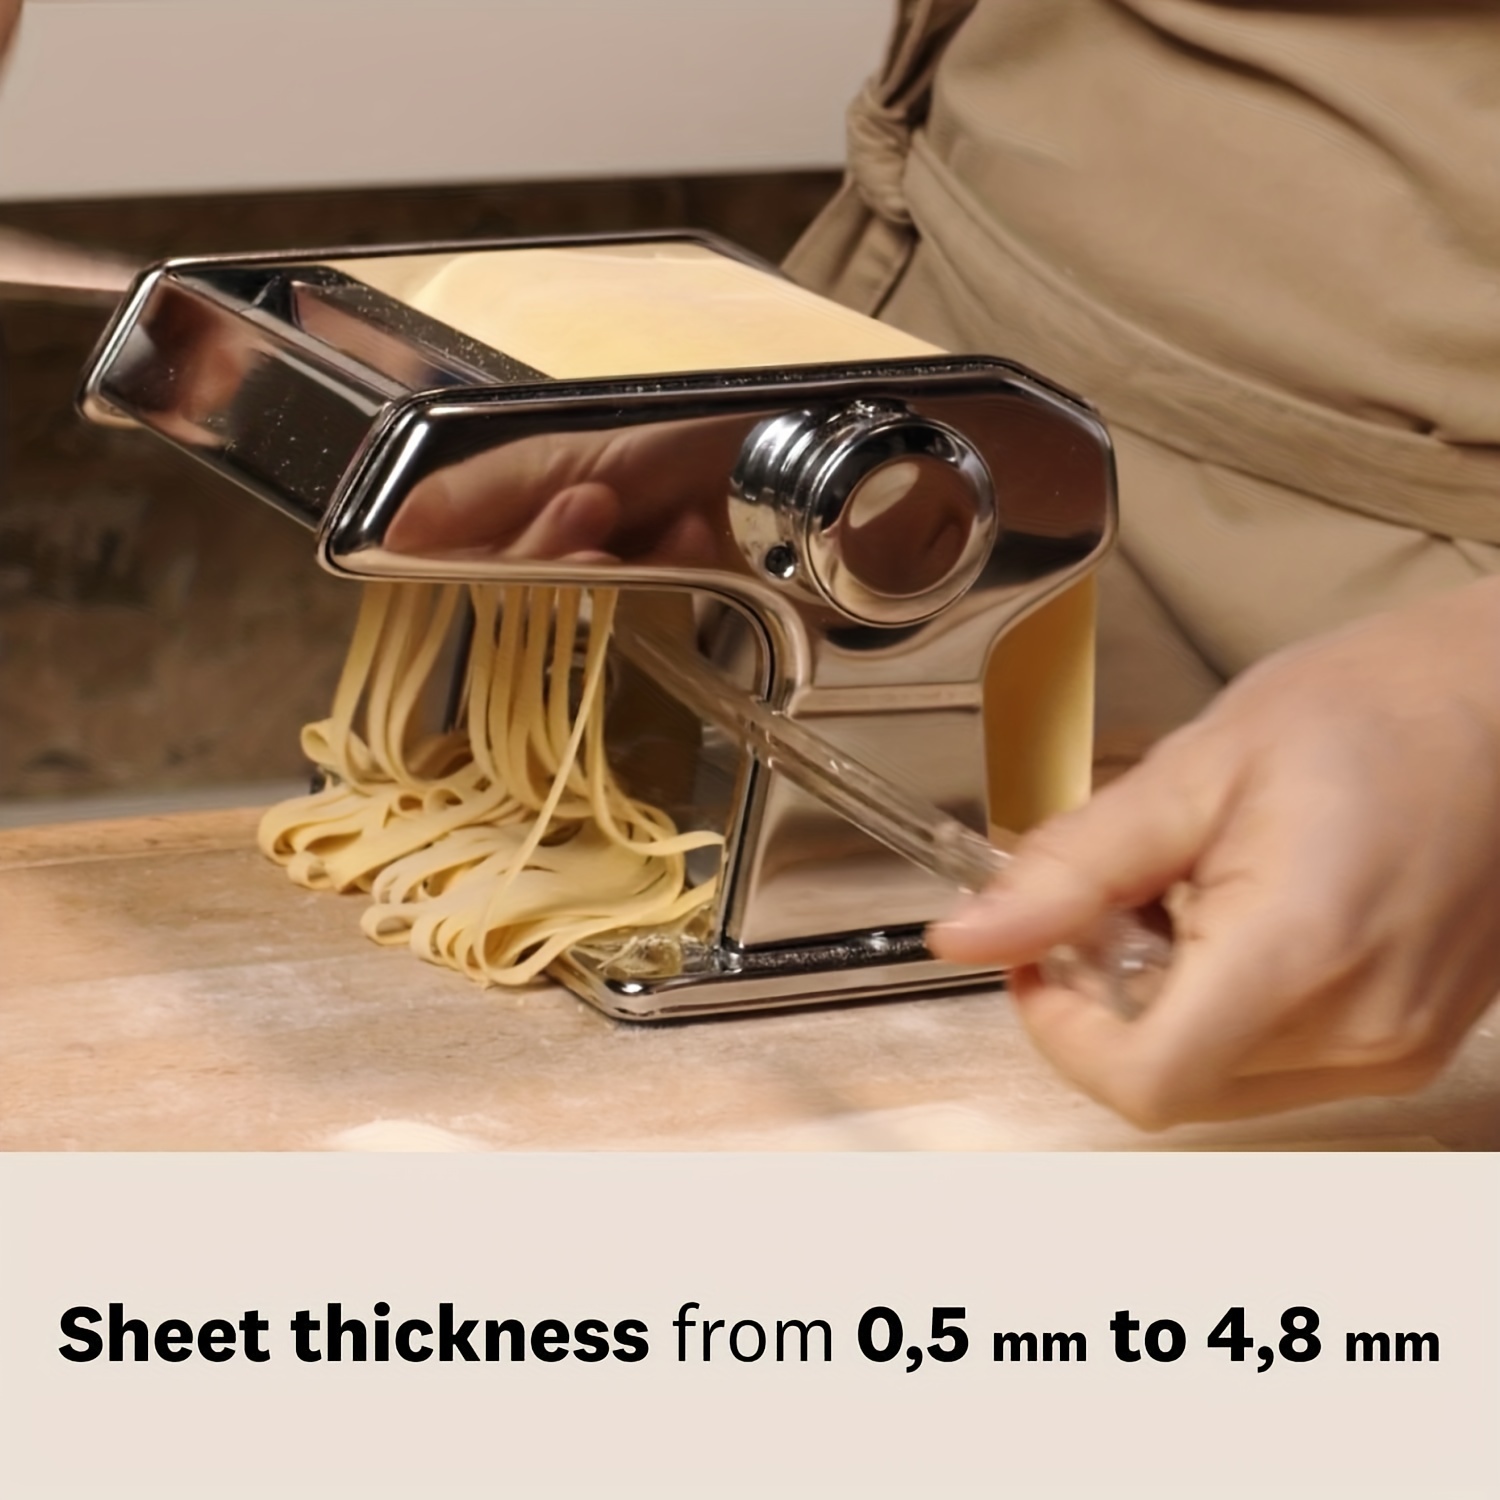 Accordion Cutter, Adjustable Noodle Cutter For Homemade Noodles